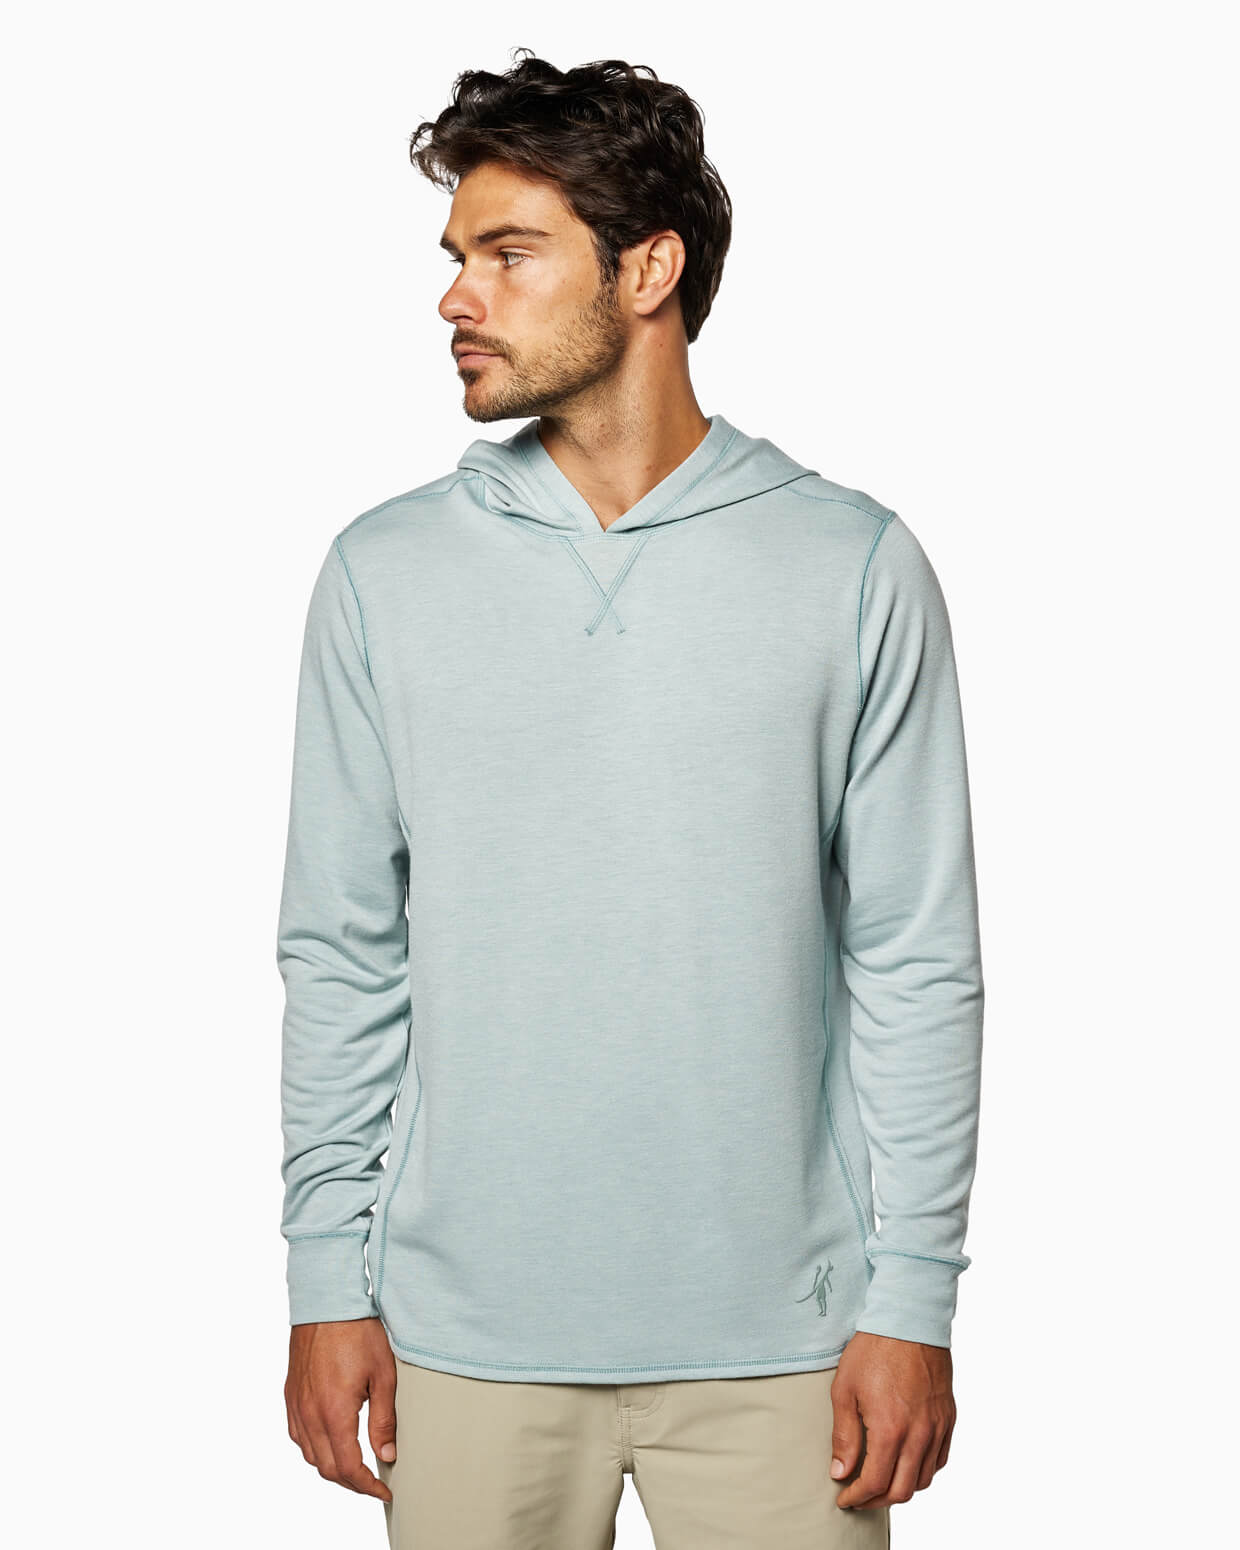 Toes on the Nose Sea Silk Long Sleeve Hoodie (6 Colors)